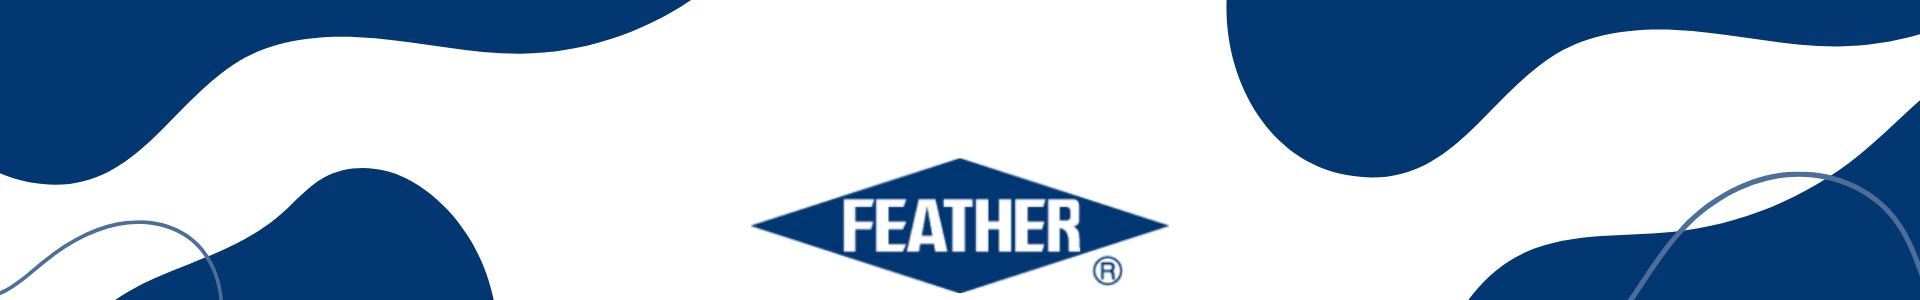 Marca Feather